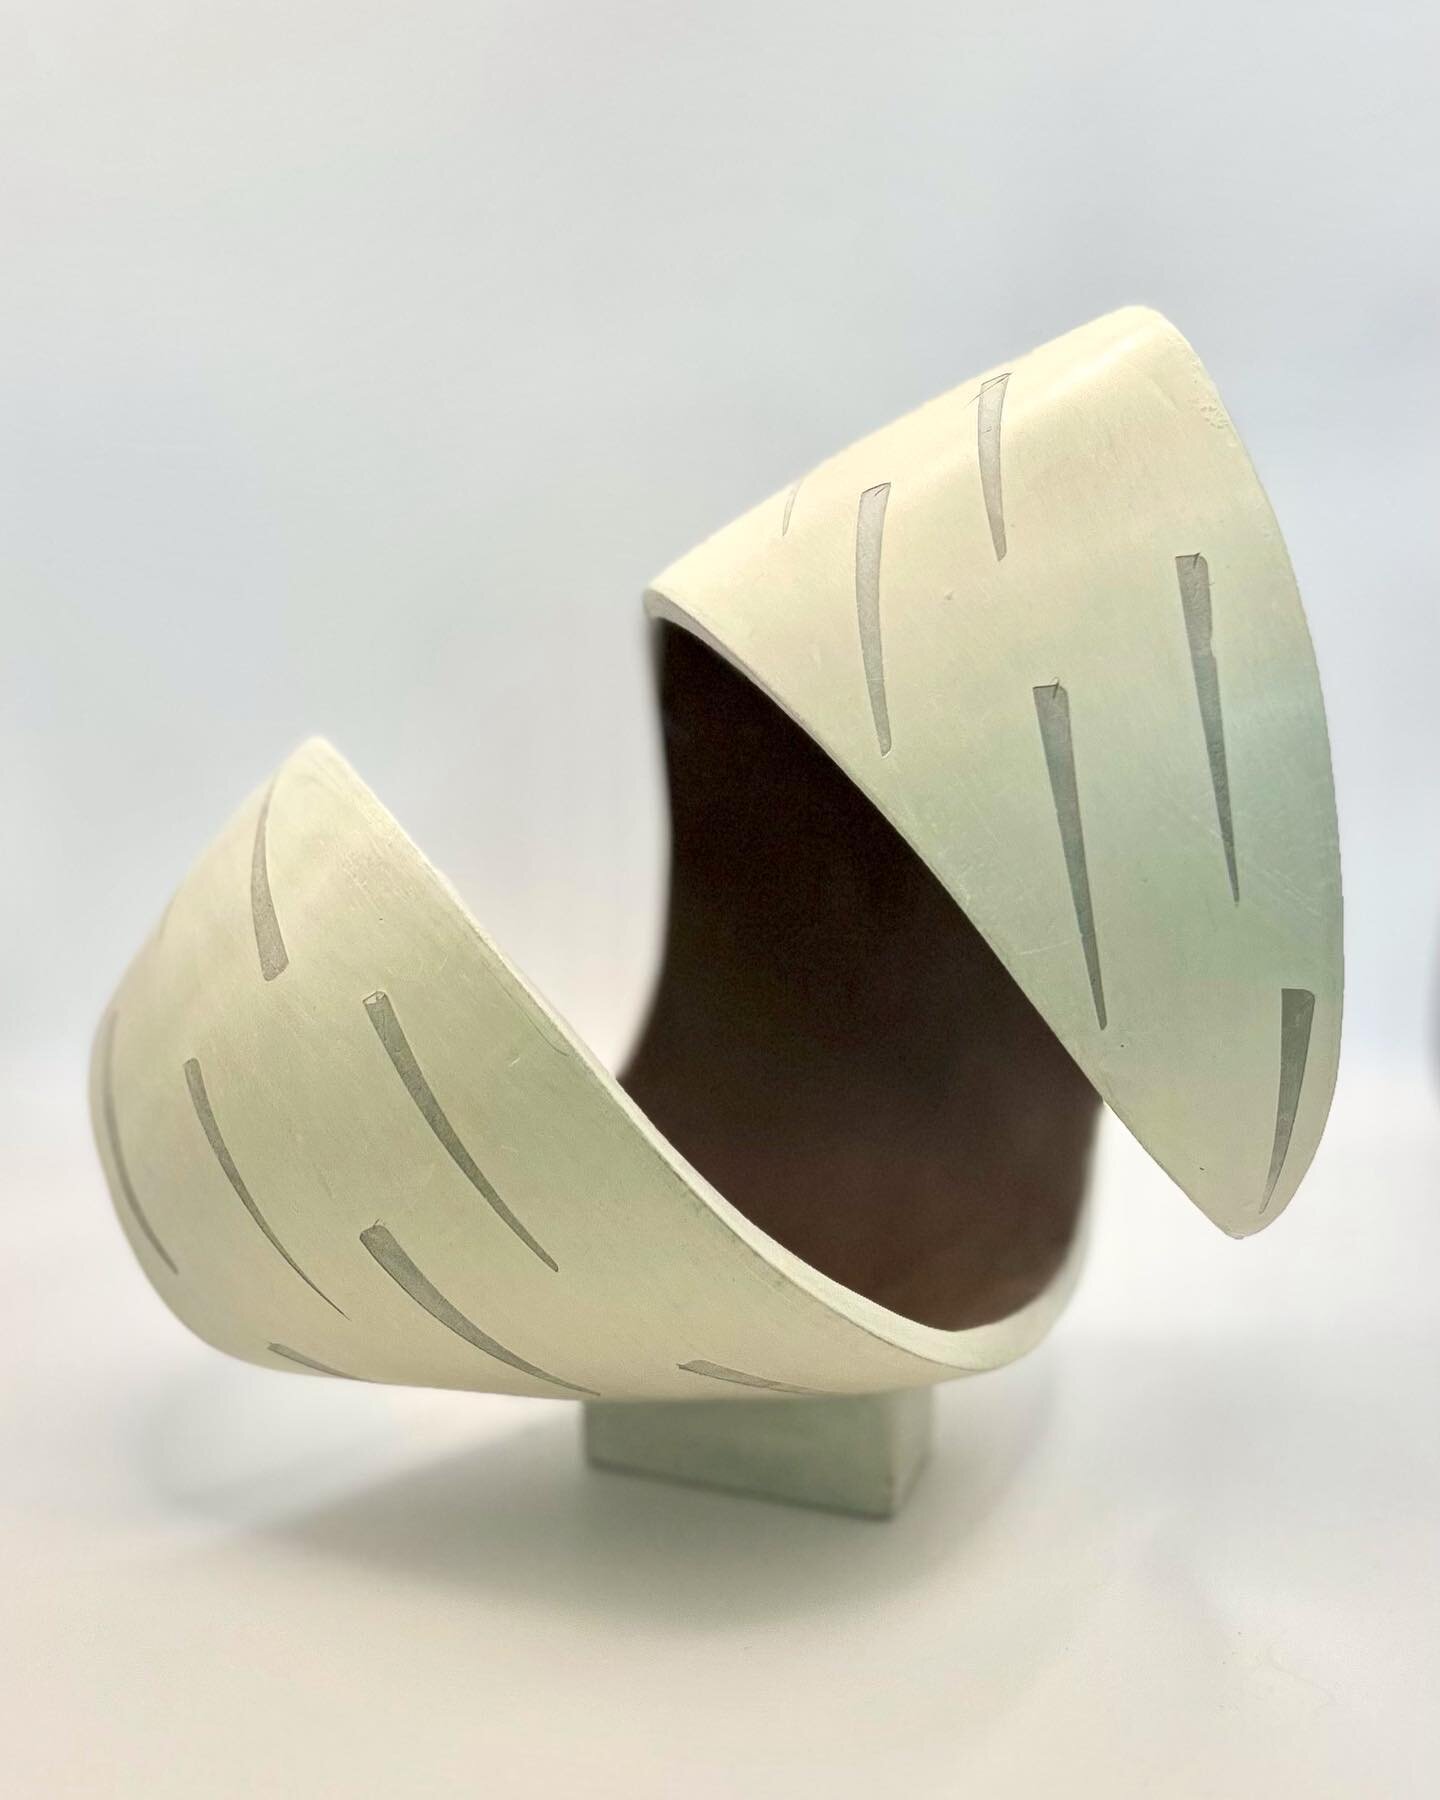 Twisted form coming with me to Brighton in May for @artistsopenhouses ✨ &hellip;. Venue 4 on @fivewaysartistsgroup and Venue 7 on @7dialsart  Exciting event &hellip;. #handbuiltceramics #makersofsussex #contemporartceramics #decorativeceramics #stone